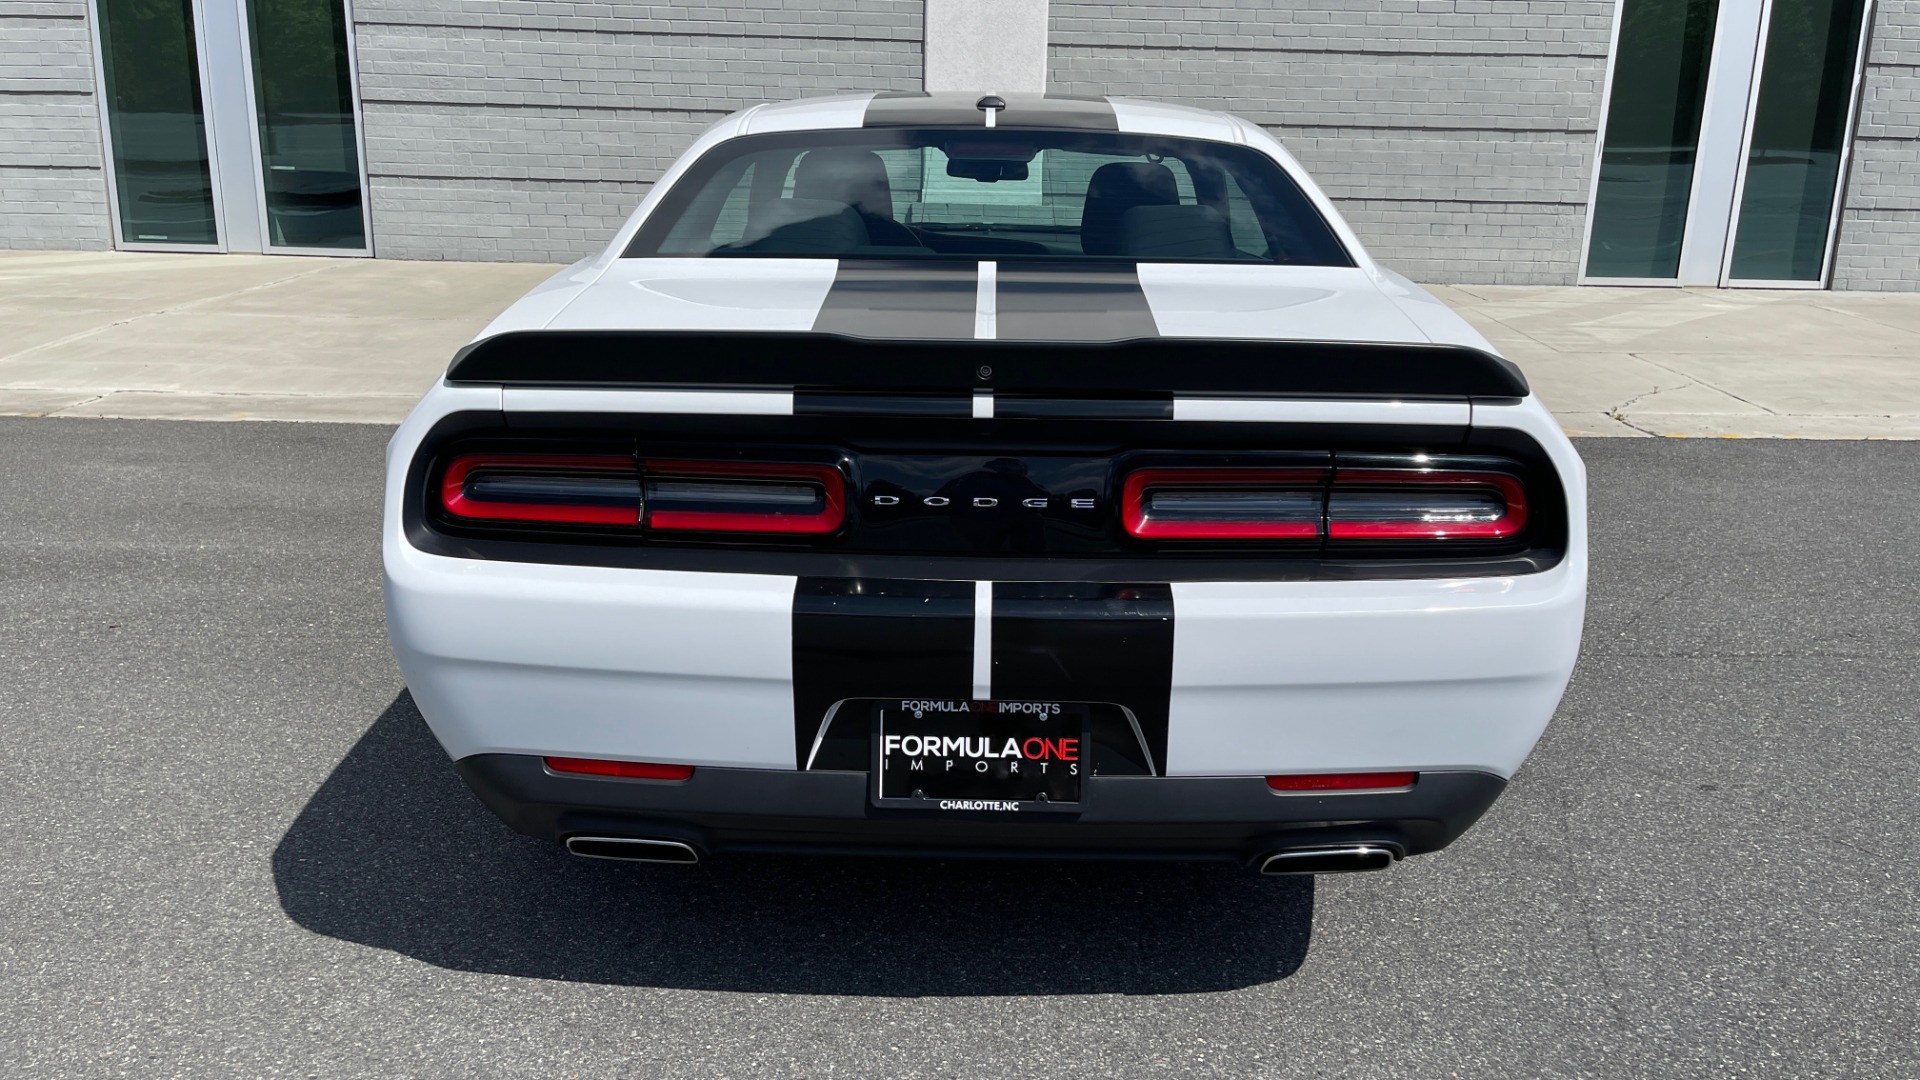 Used 2018 Dodge CHALLENGER SXT BLACKTOP COUPE / 3.6L V6 / 8-SPD AUTO / REARVIEW for sale Sold at Formula Imports in Charlotte NC 28227 22